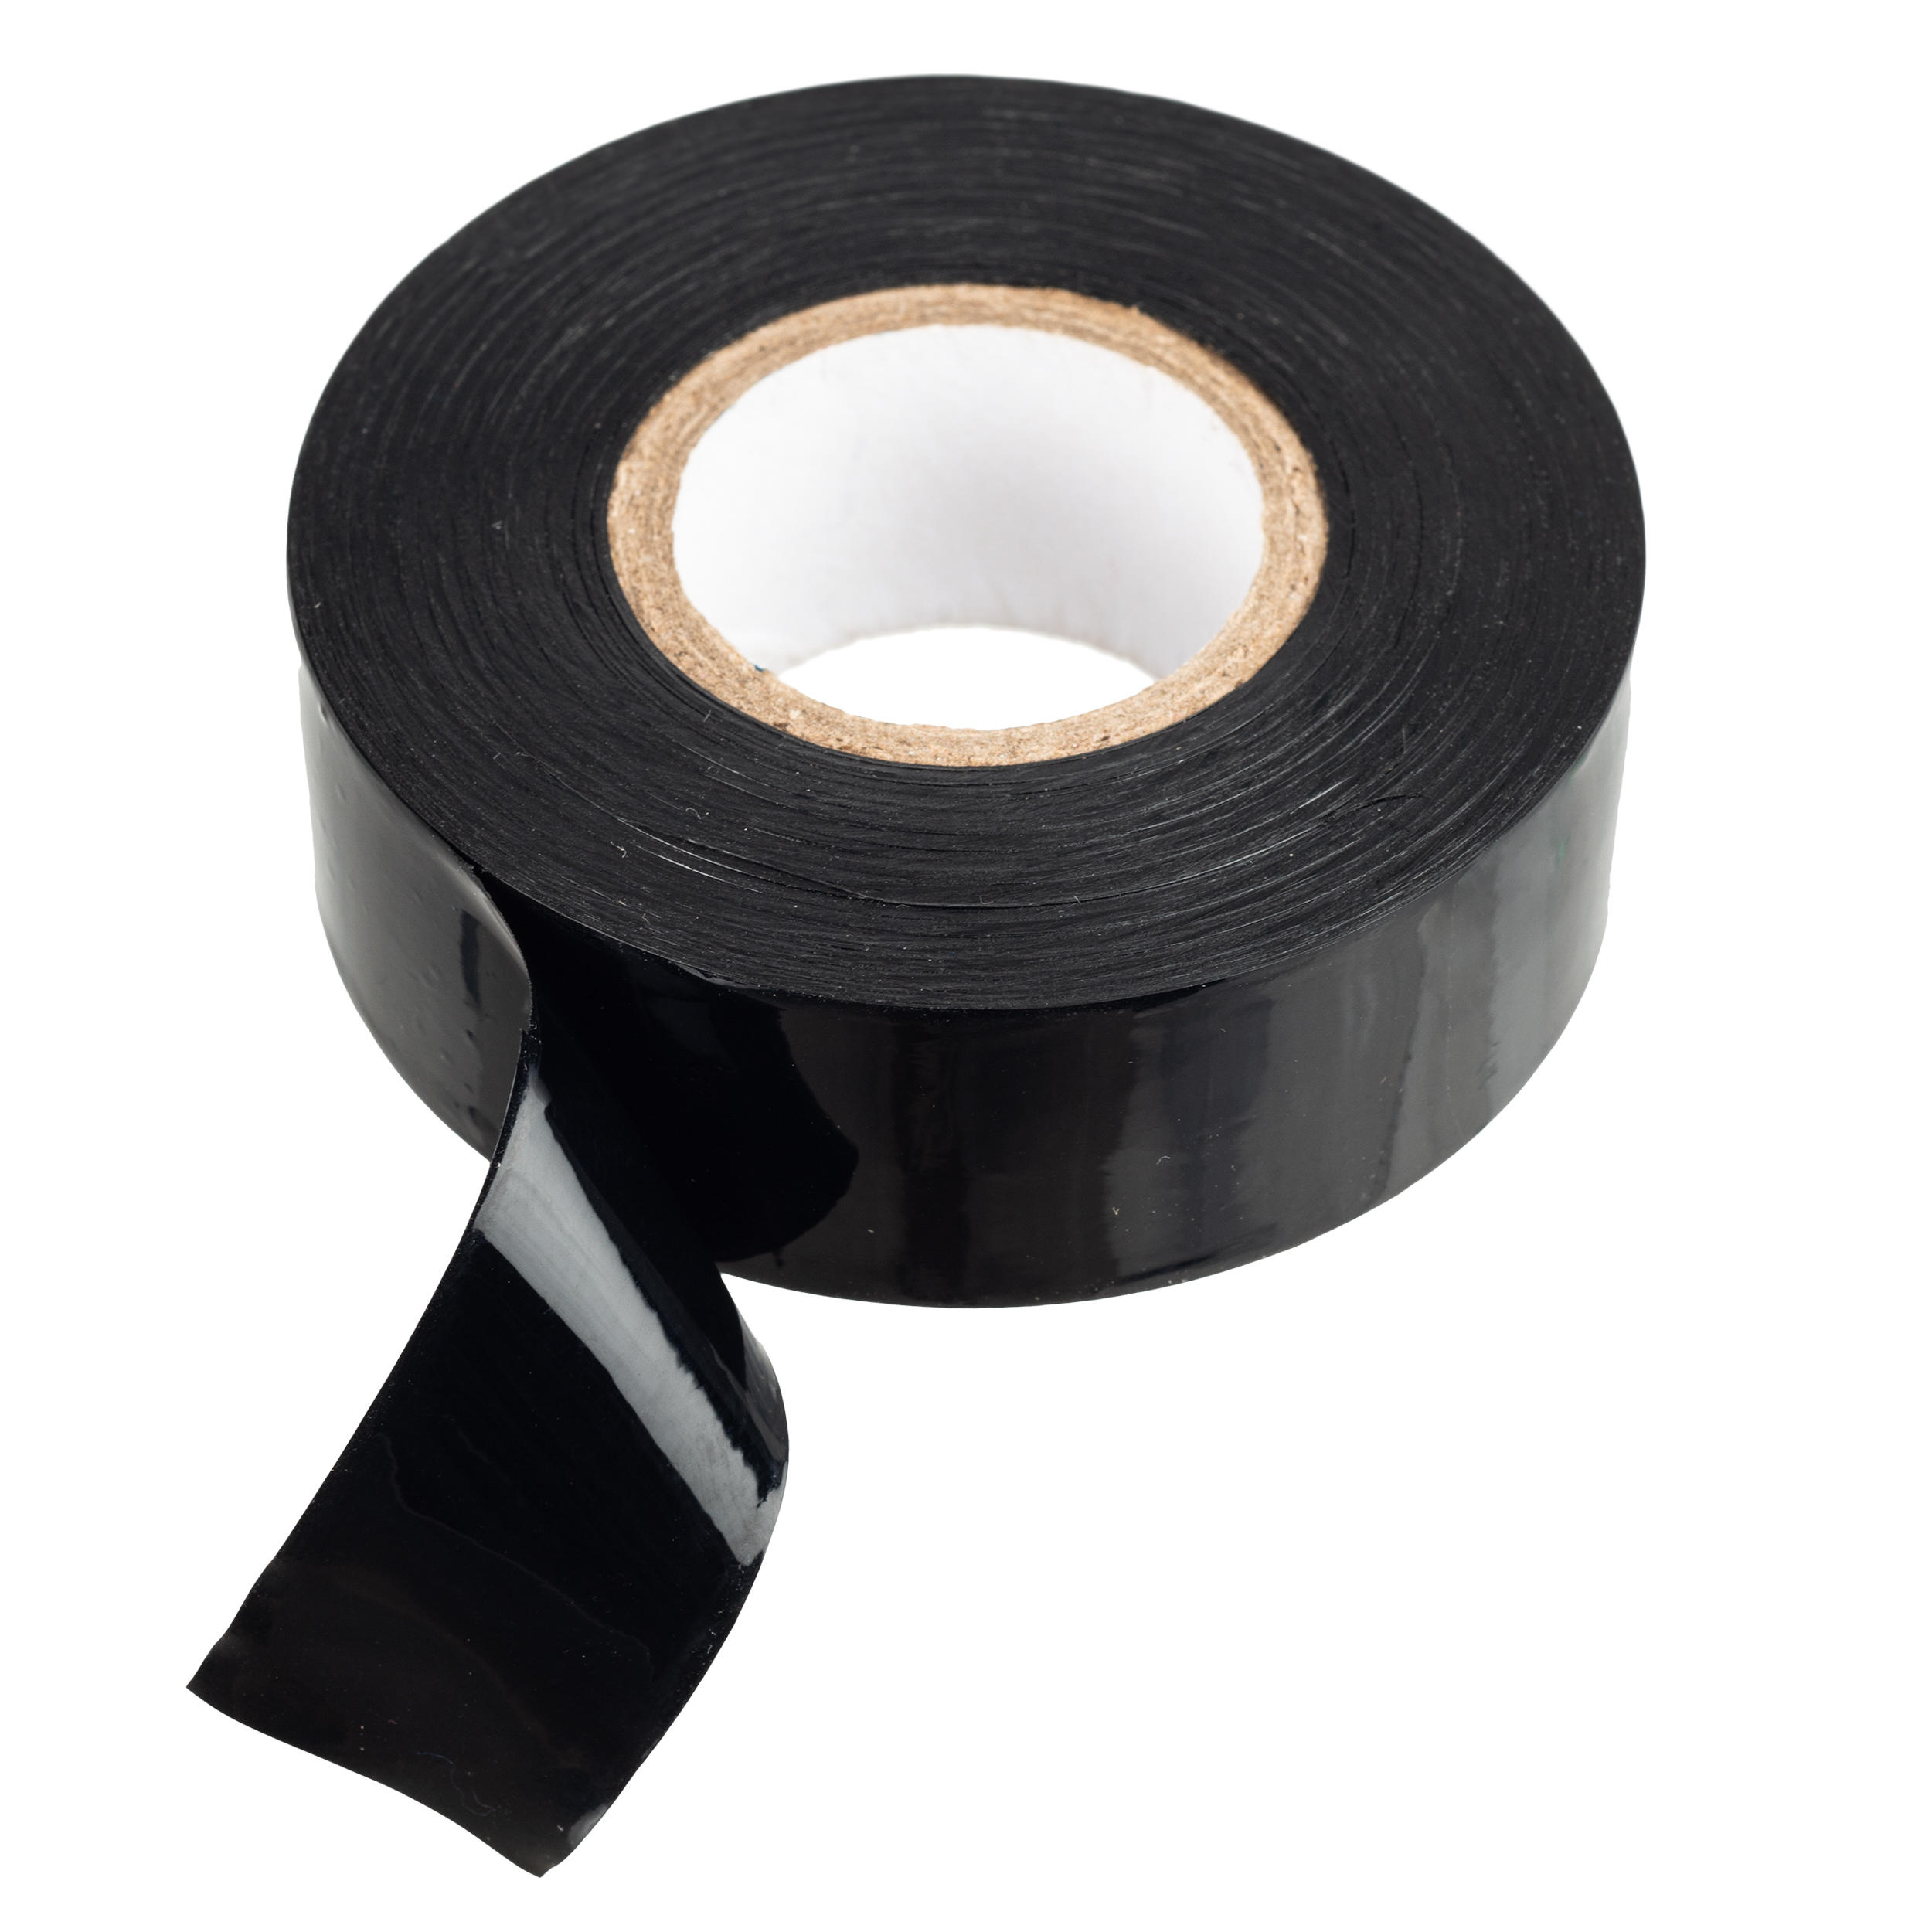 Rugby Tape - Black - No Size By OFFLOAD | Decathlon